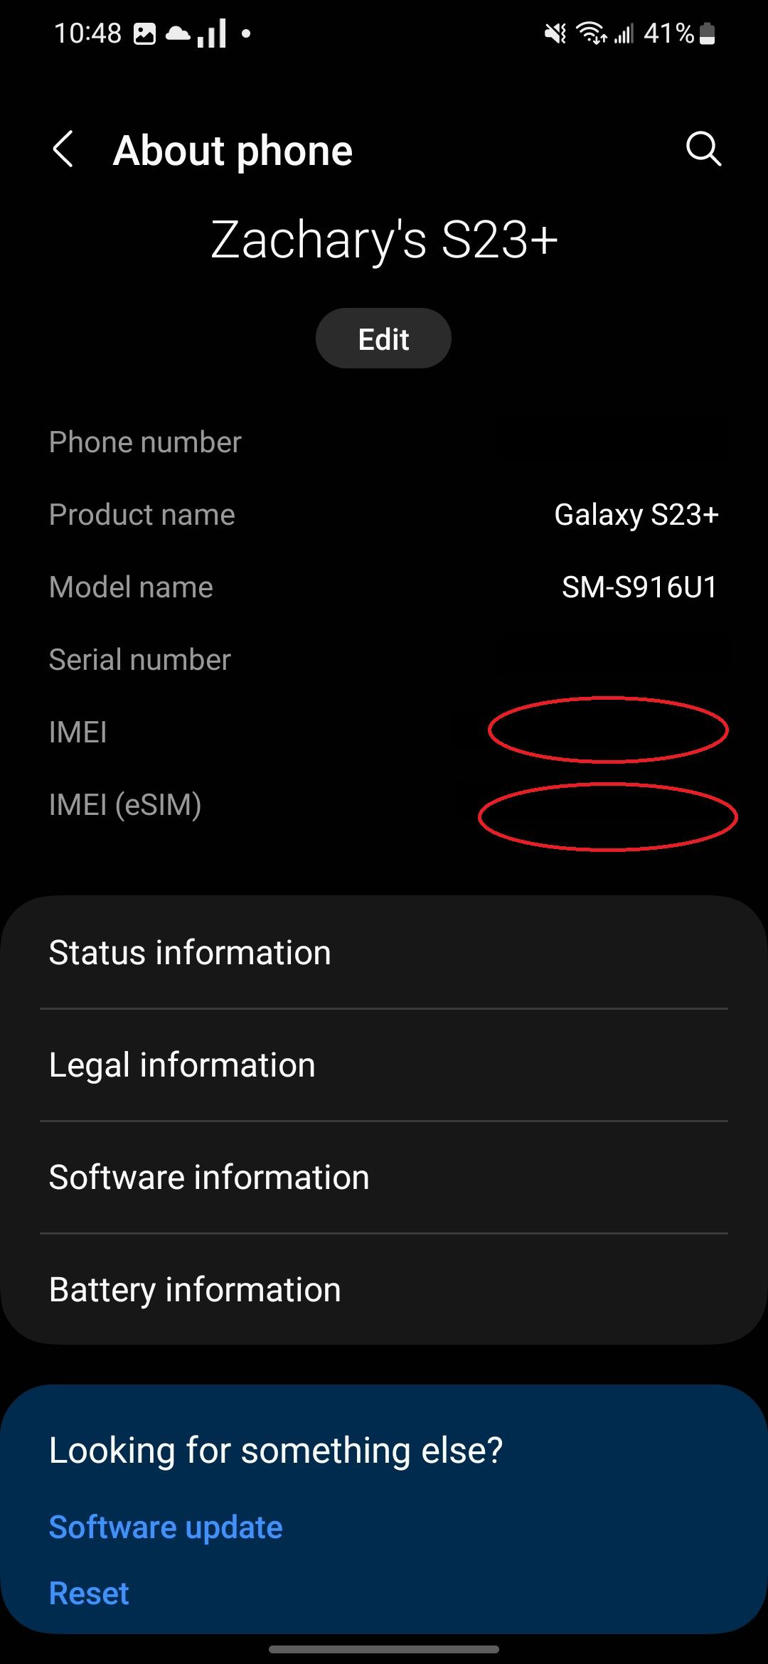 The About Phone section of the Samsung Settings app with red circles where the IMEI numbers for the phone will appear